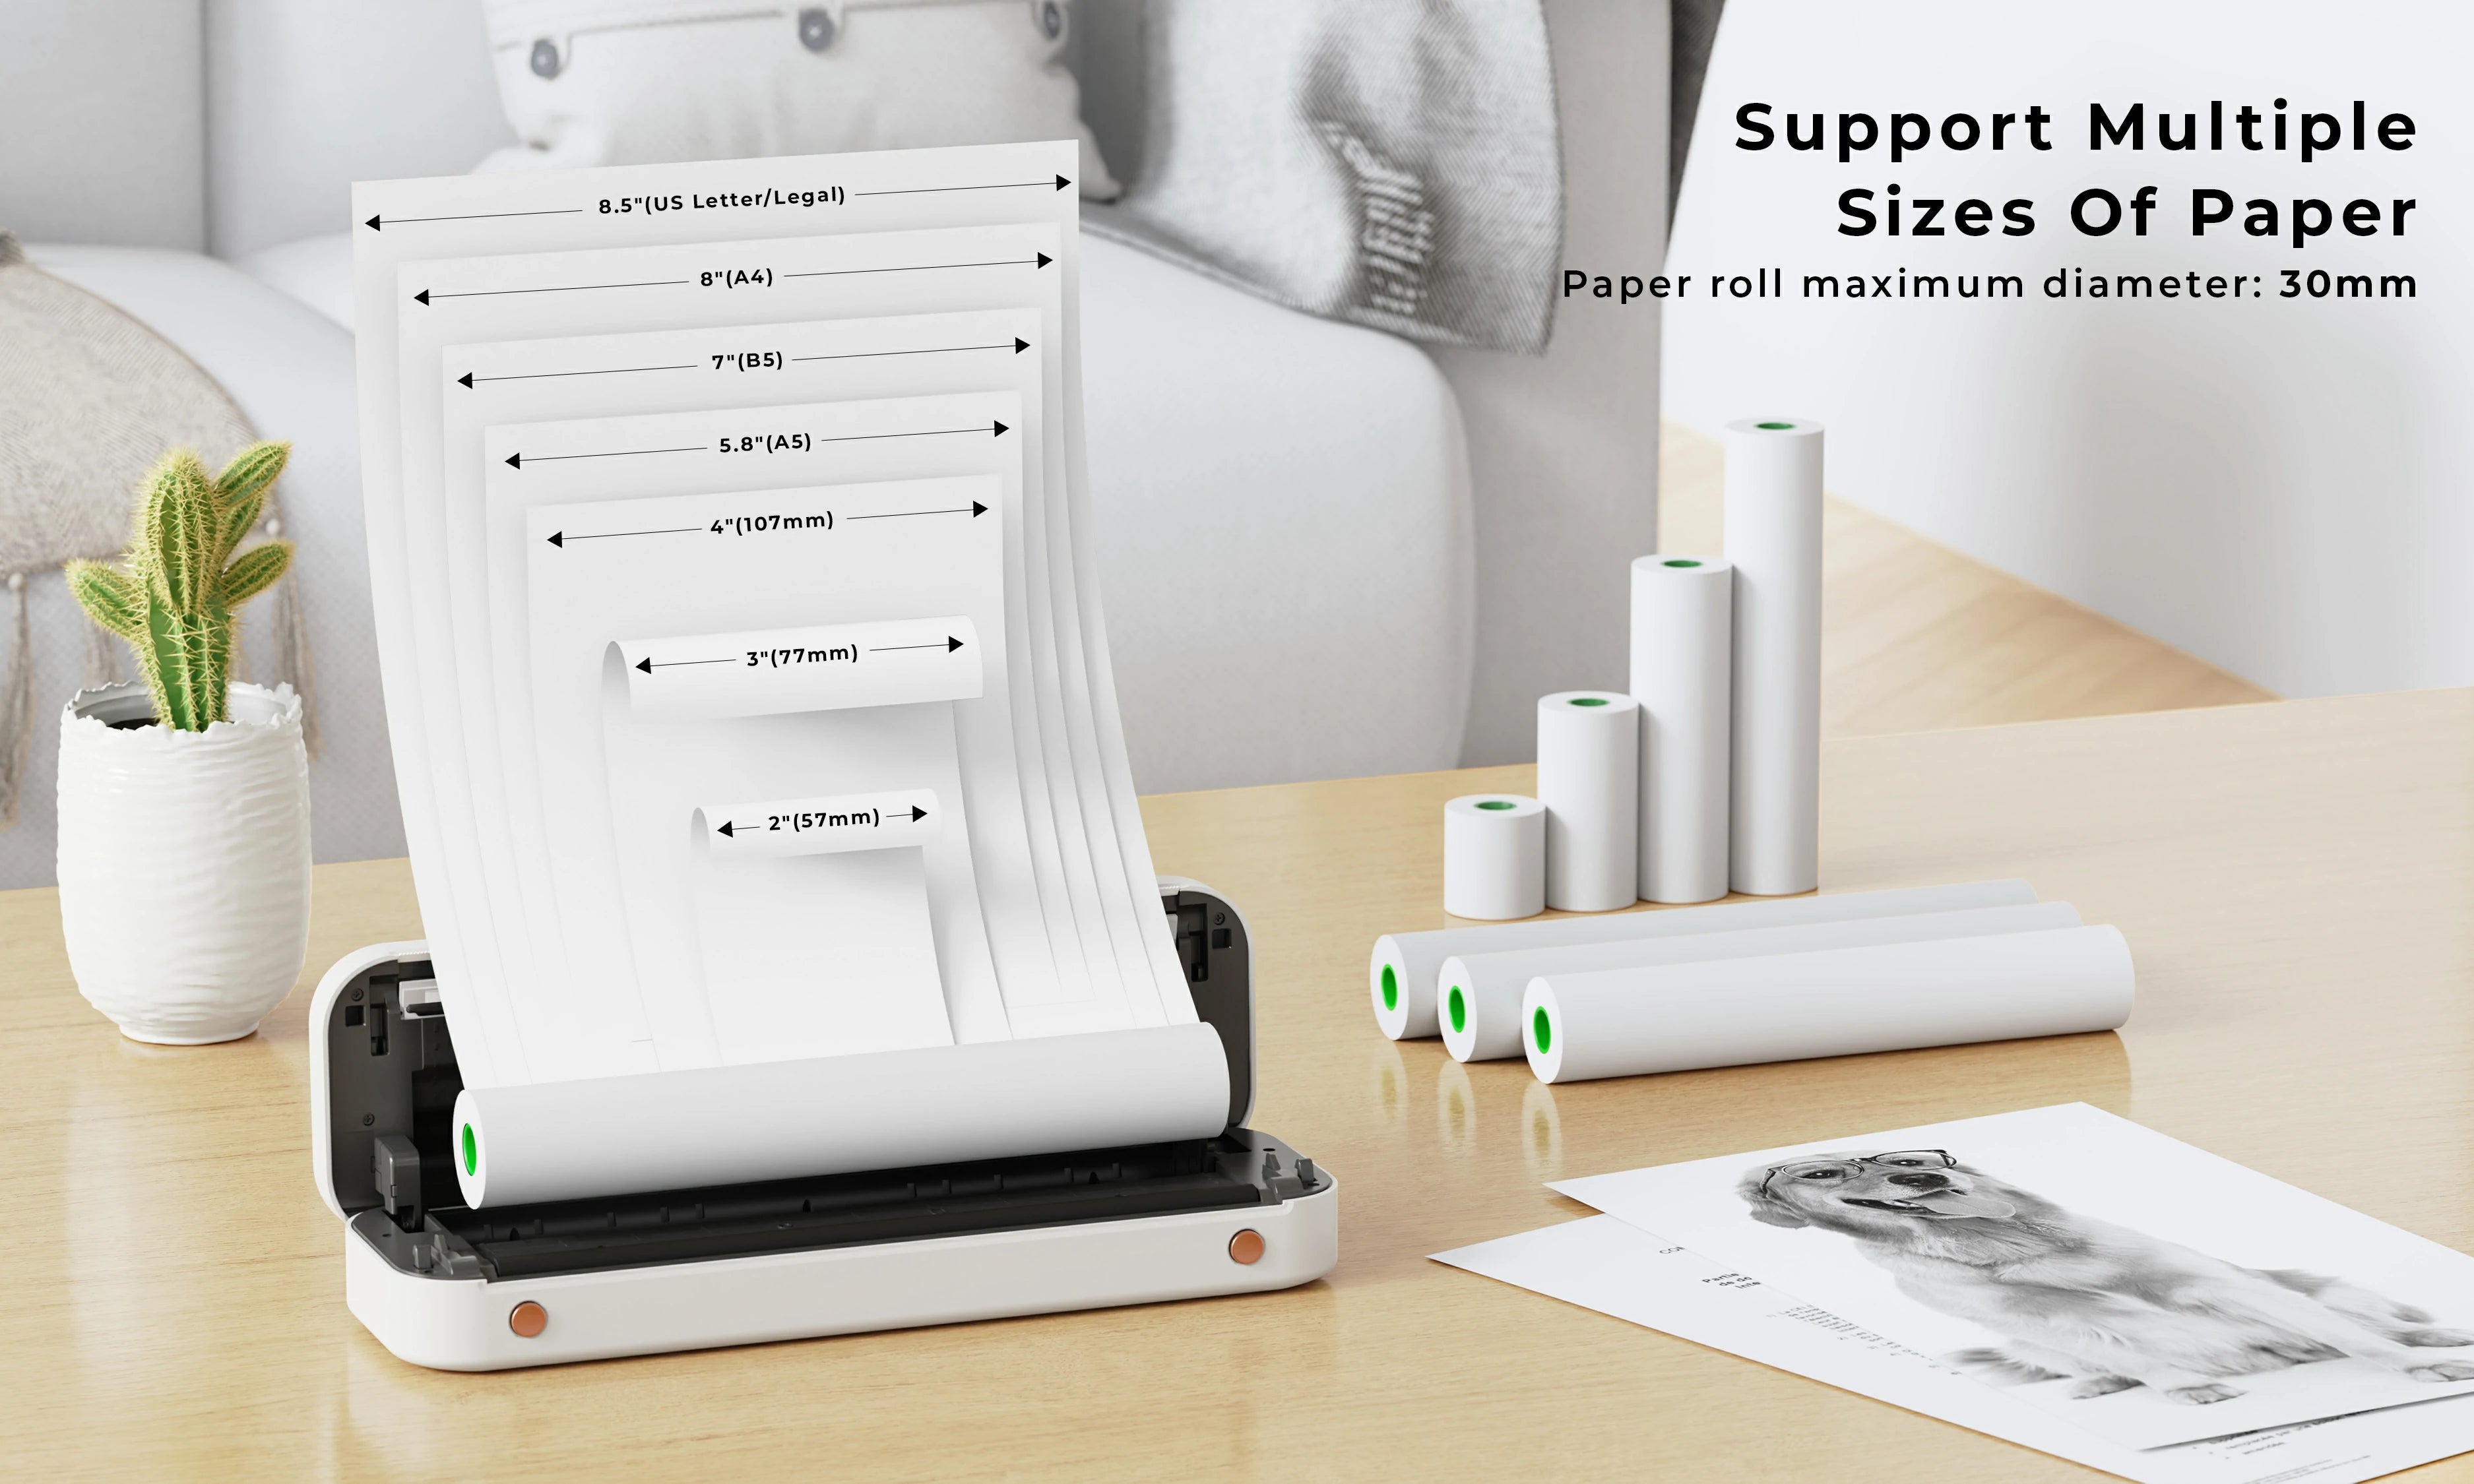 MUNBYN A4 thermal printer supports multiple sizes of paper.